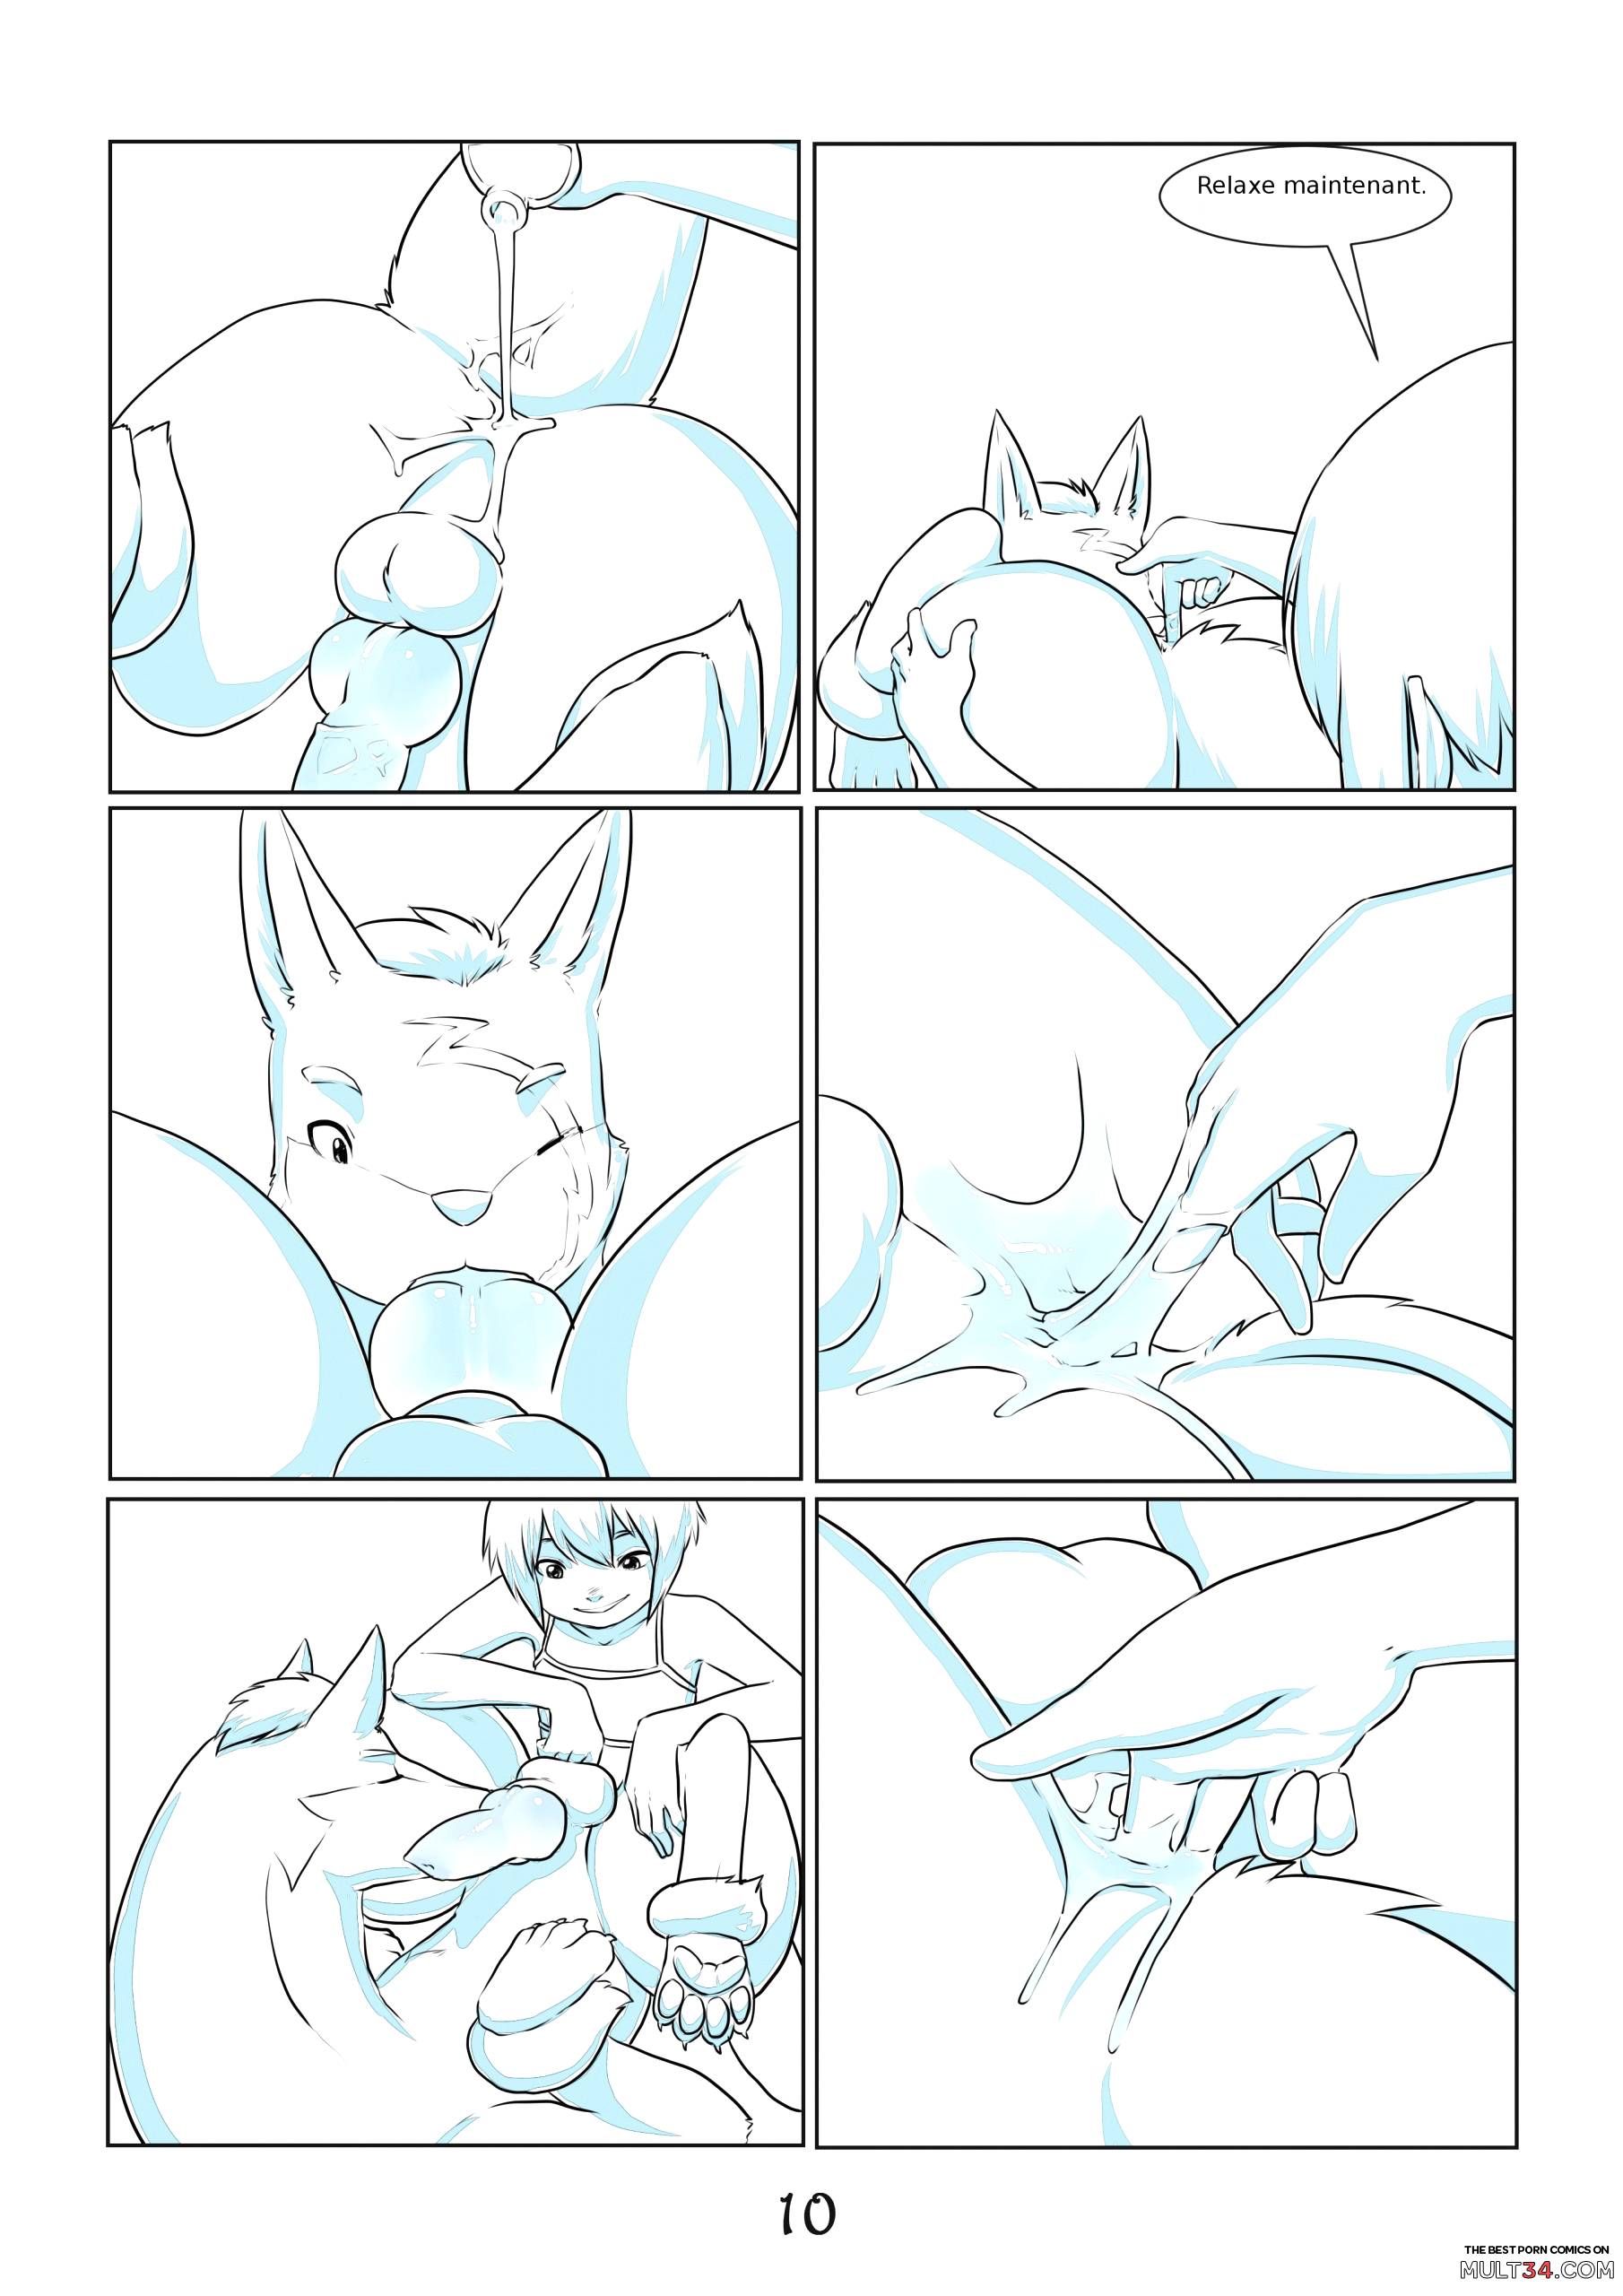 Tales of Rita and Repede - Episode 2 page 11